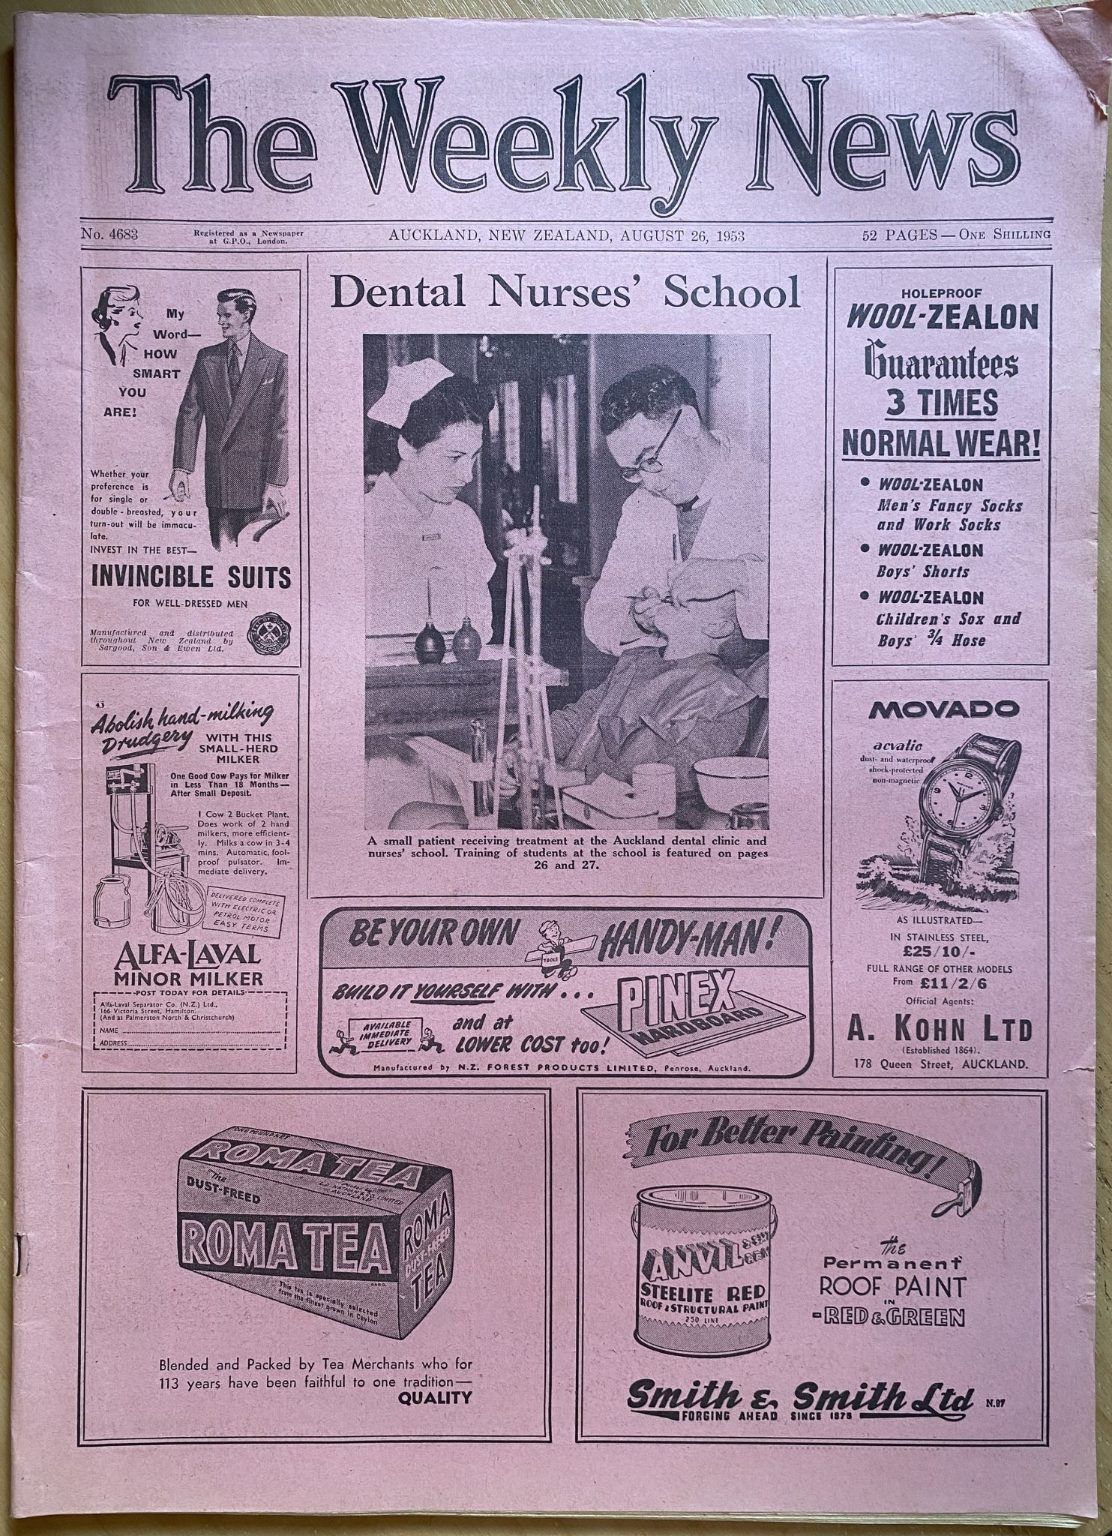 OLD NEWSPAPER: The Weekly News - No. 4683, 26 August 1953